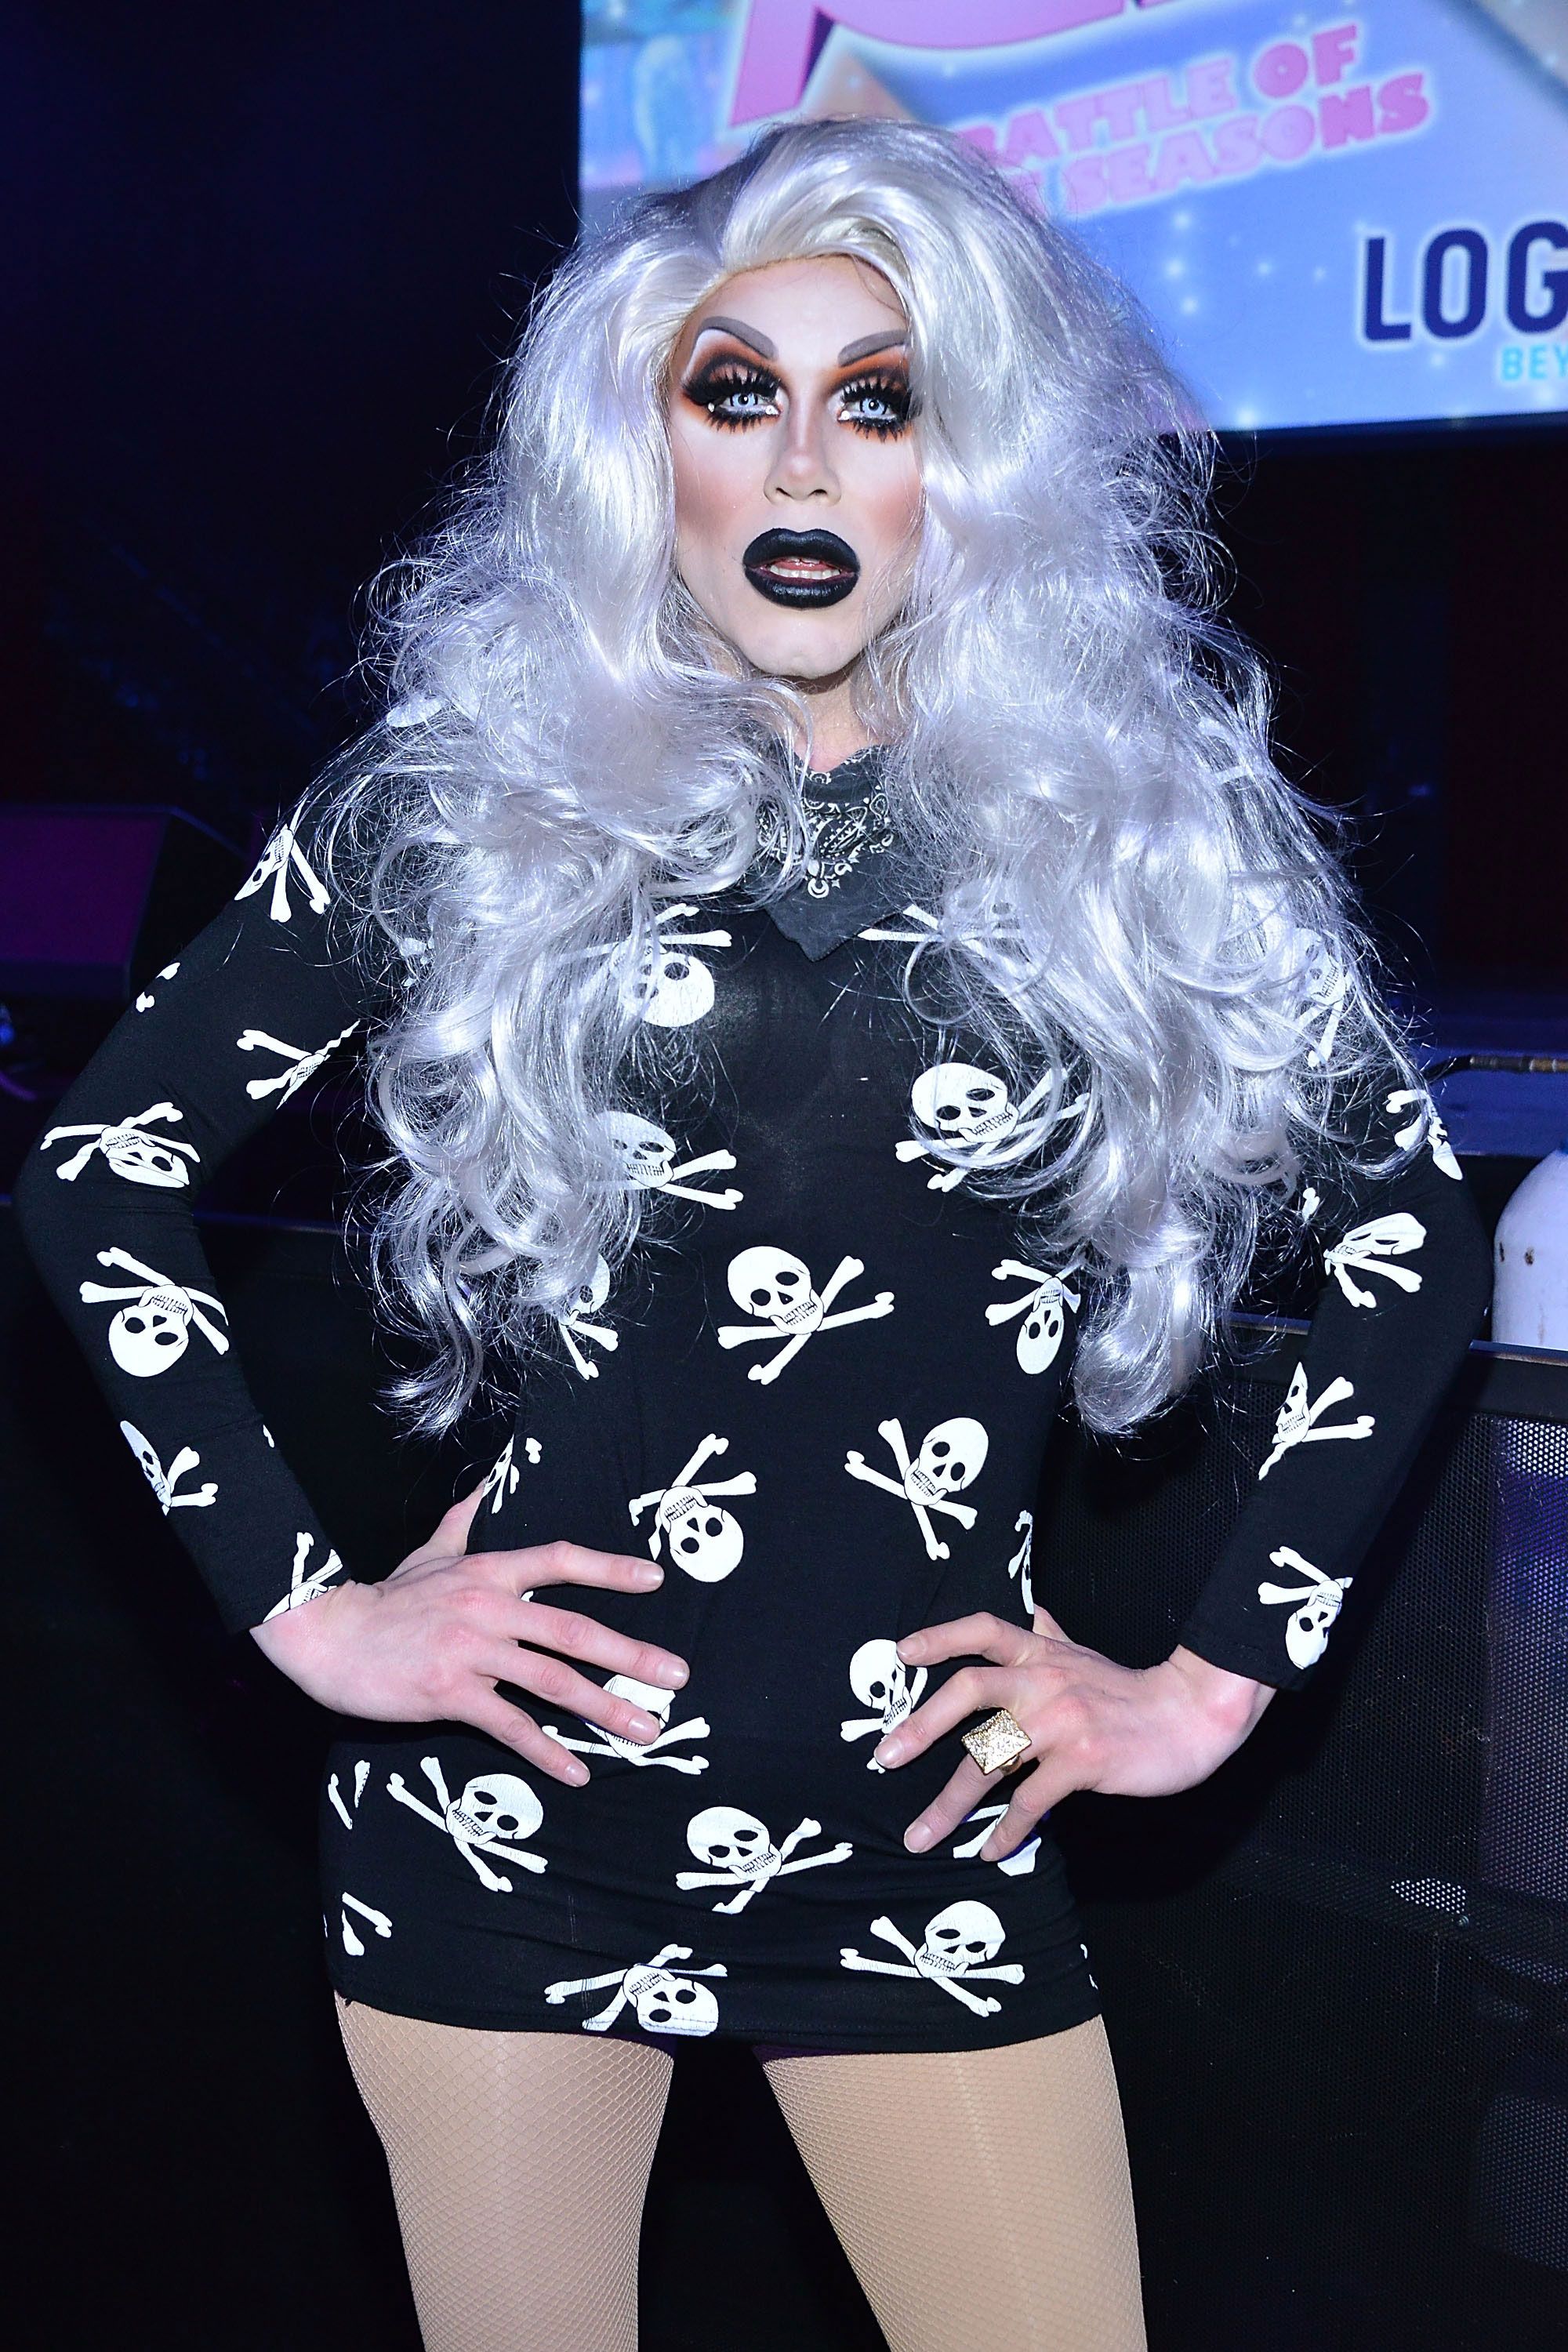 10 facts on Sharon Needles, controversies, dating life, net woth and more